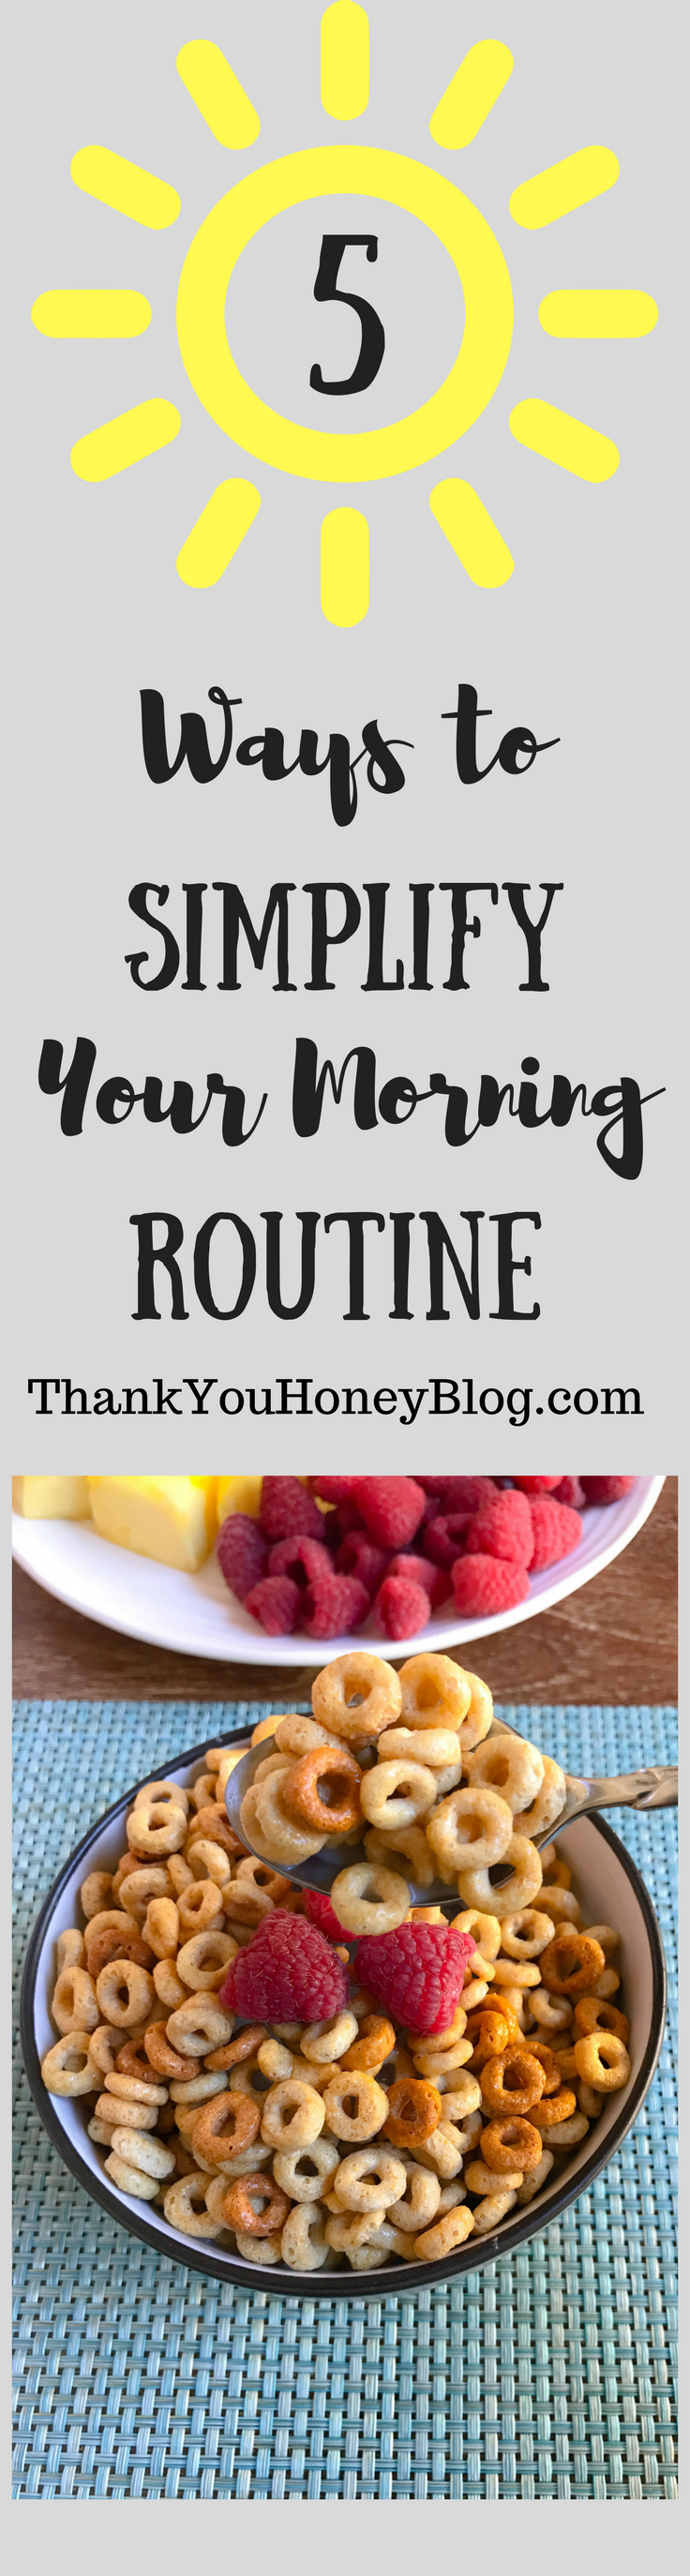 5 Ways to Simplify Your Morning Routine